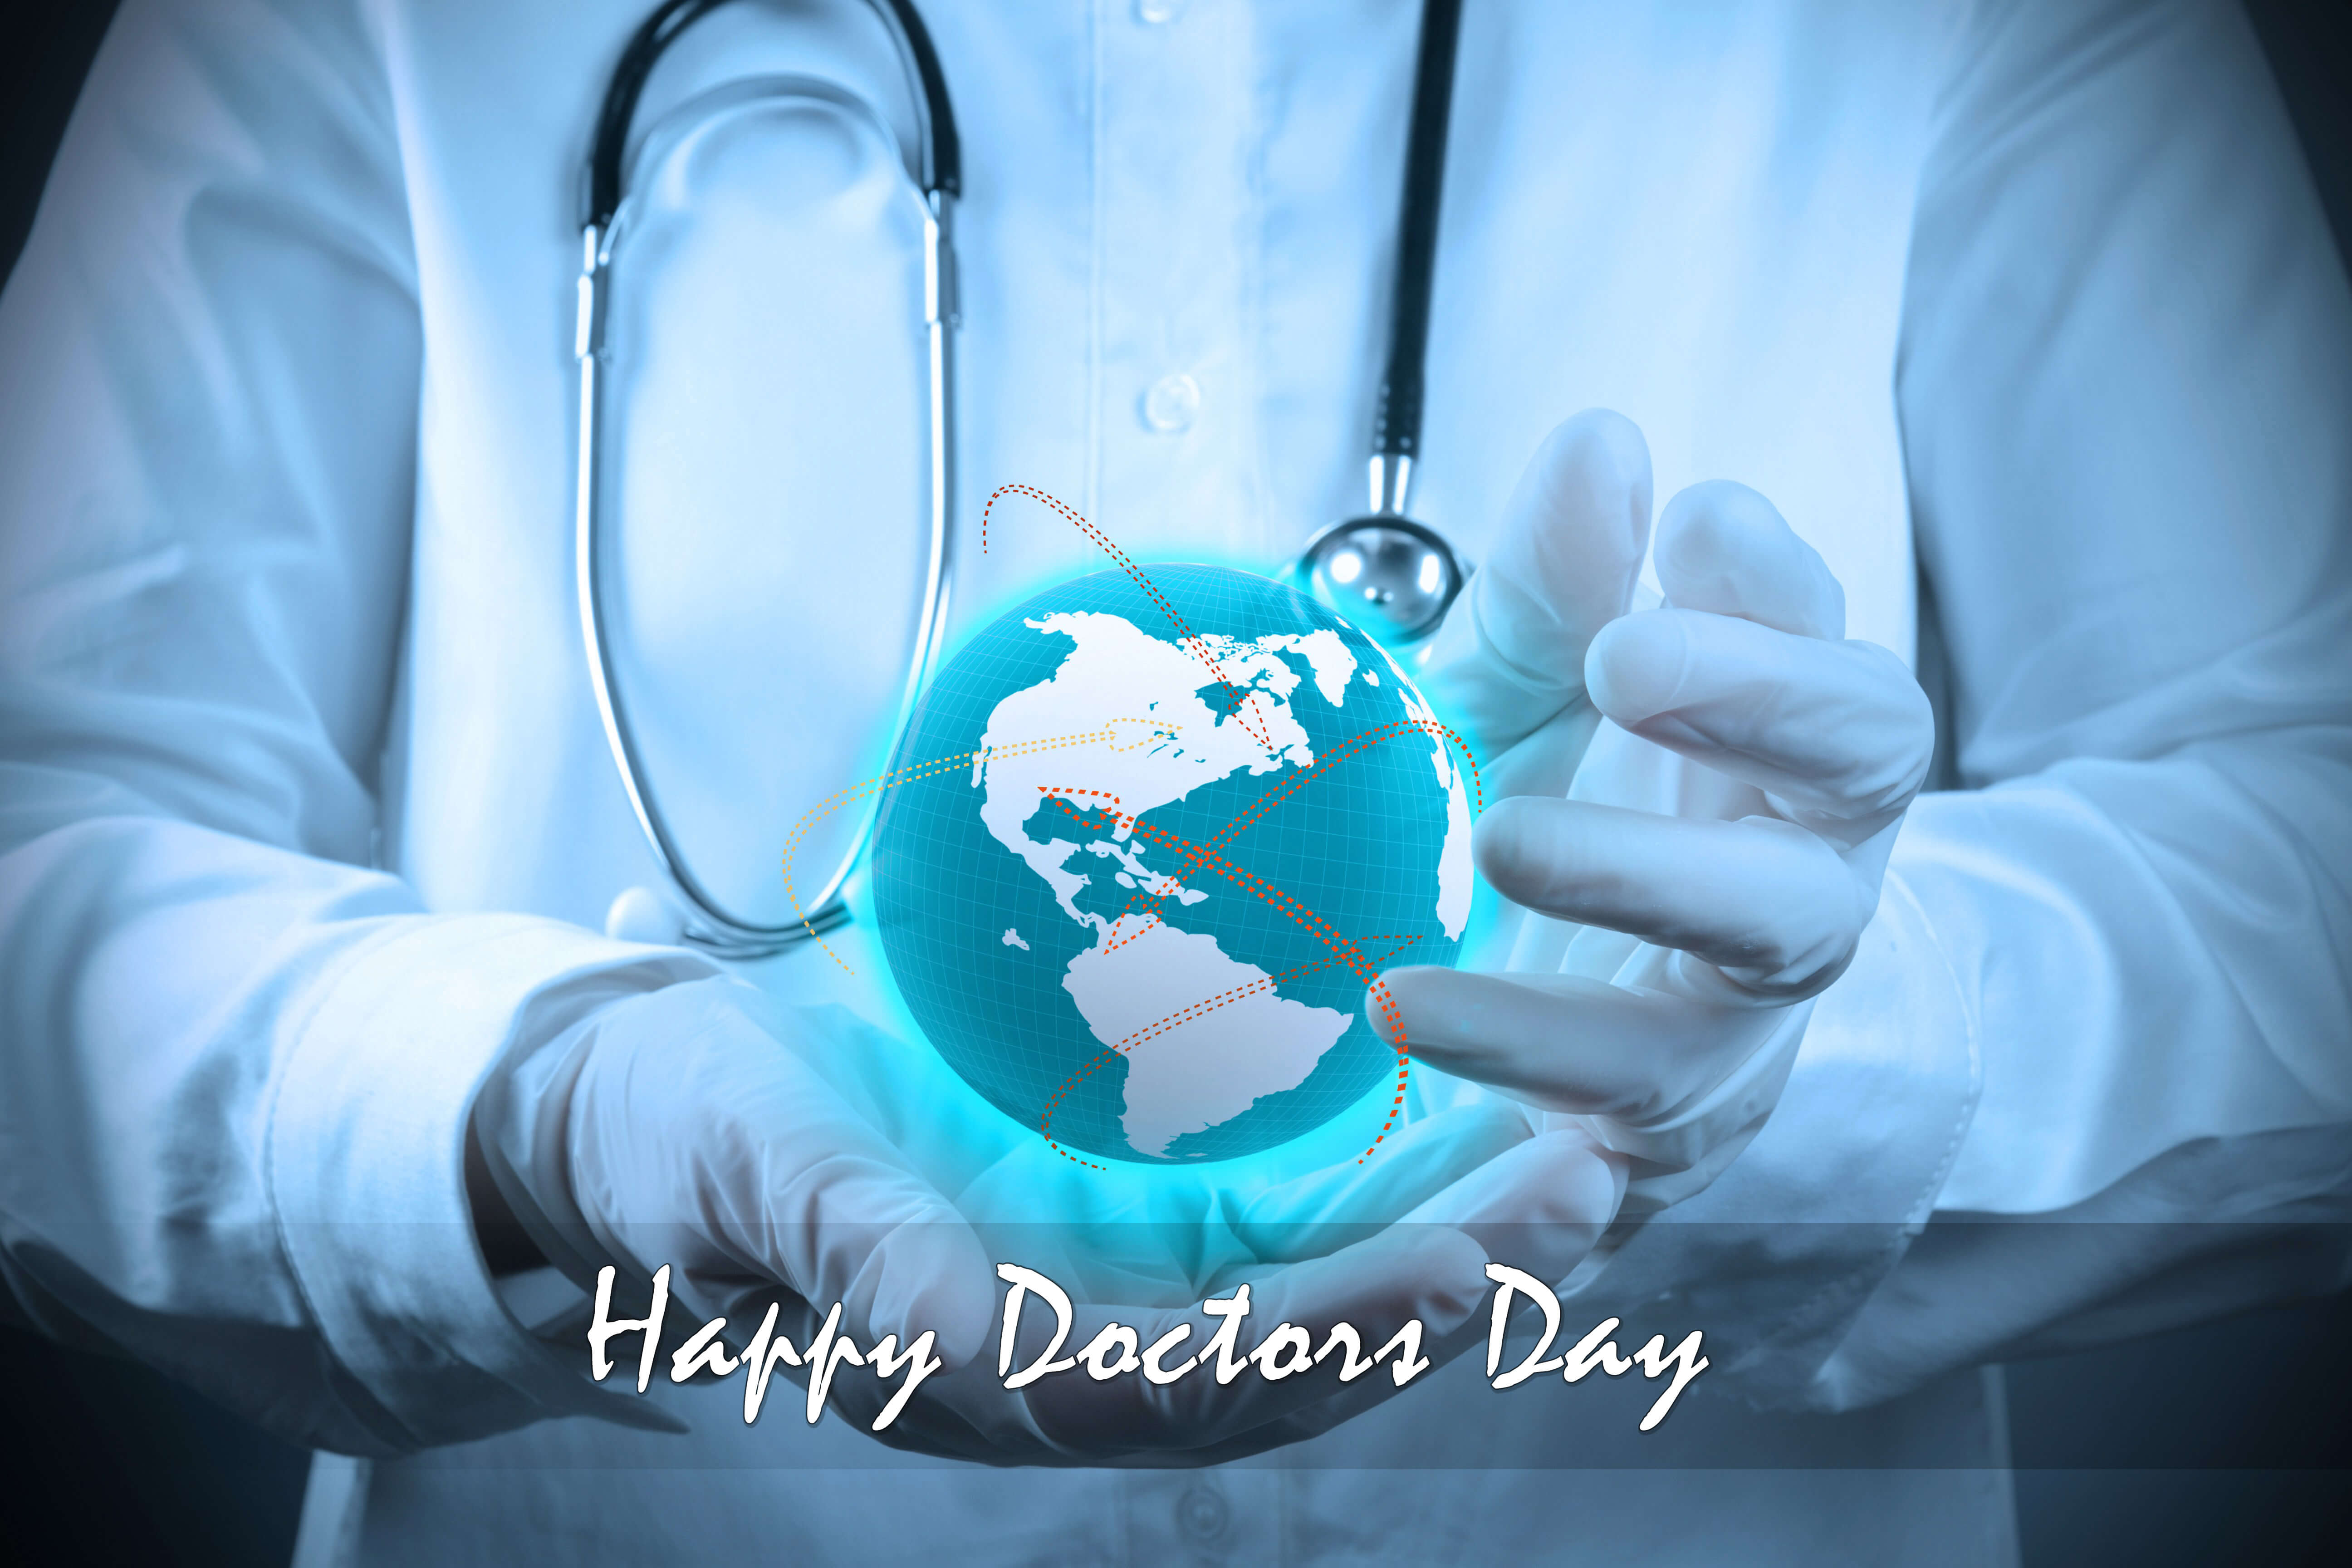 Happy Doctors Day Wishes Greetings Globe In Hand 4k HD Wallpaper